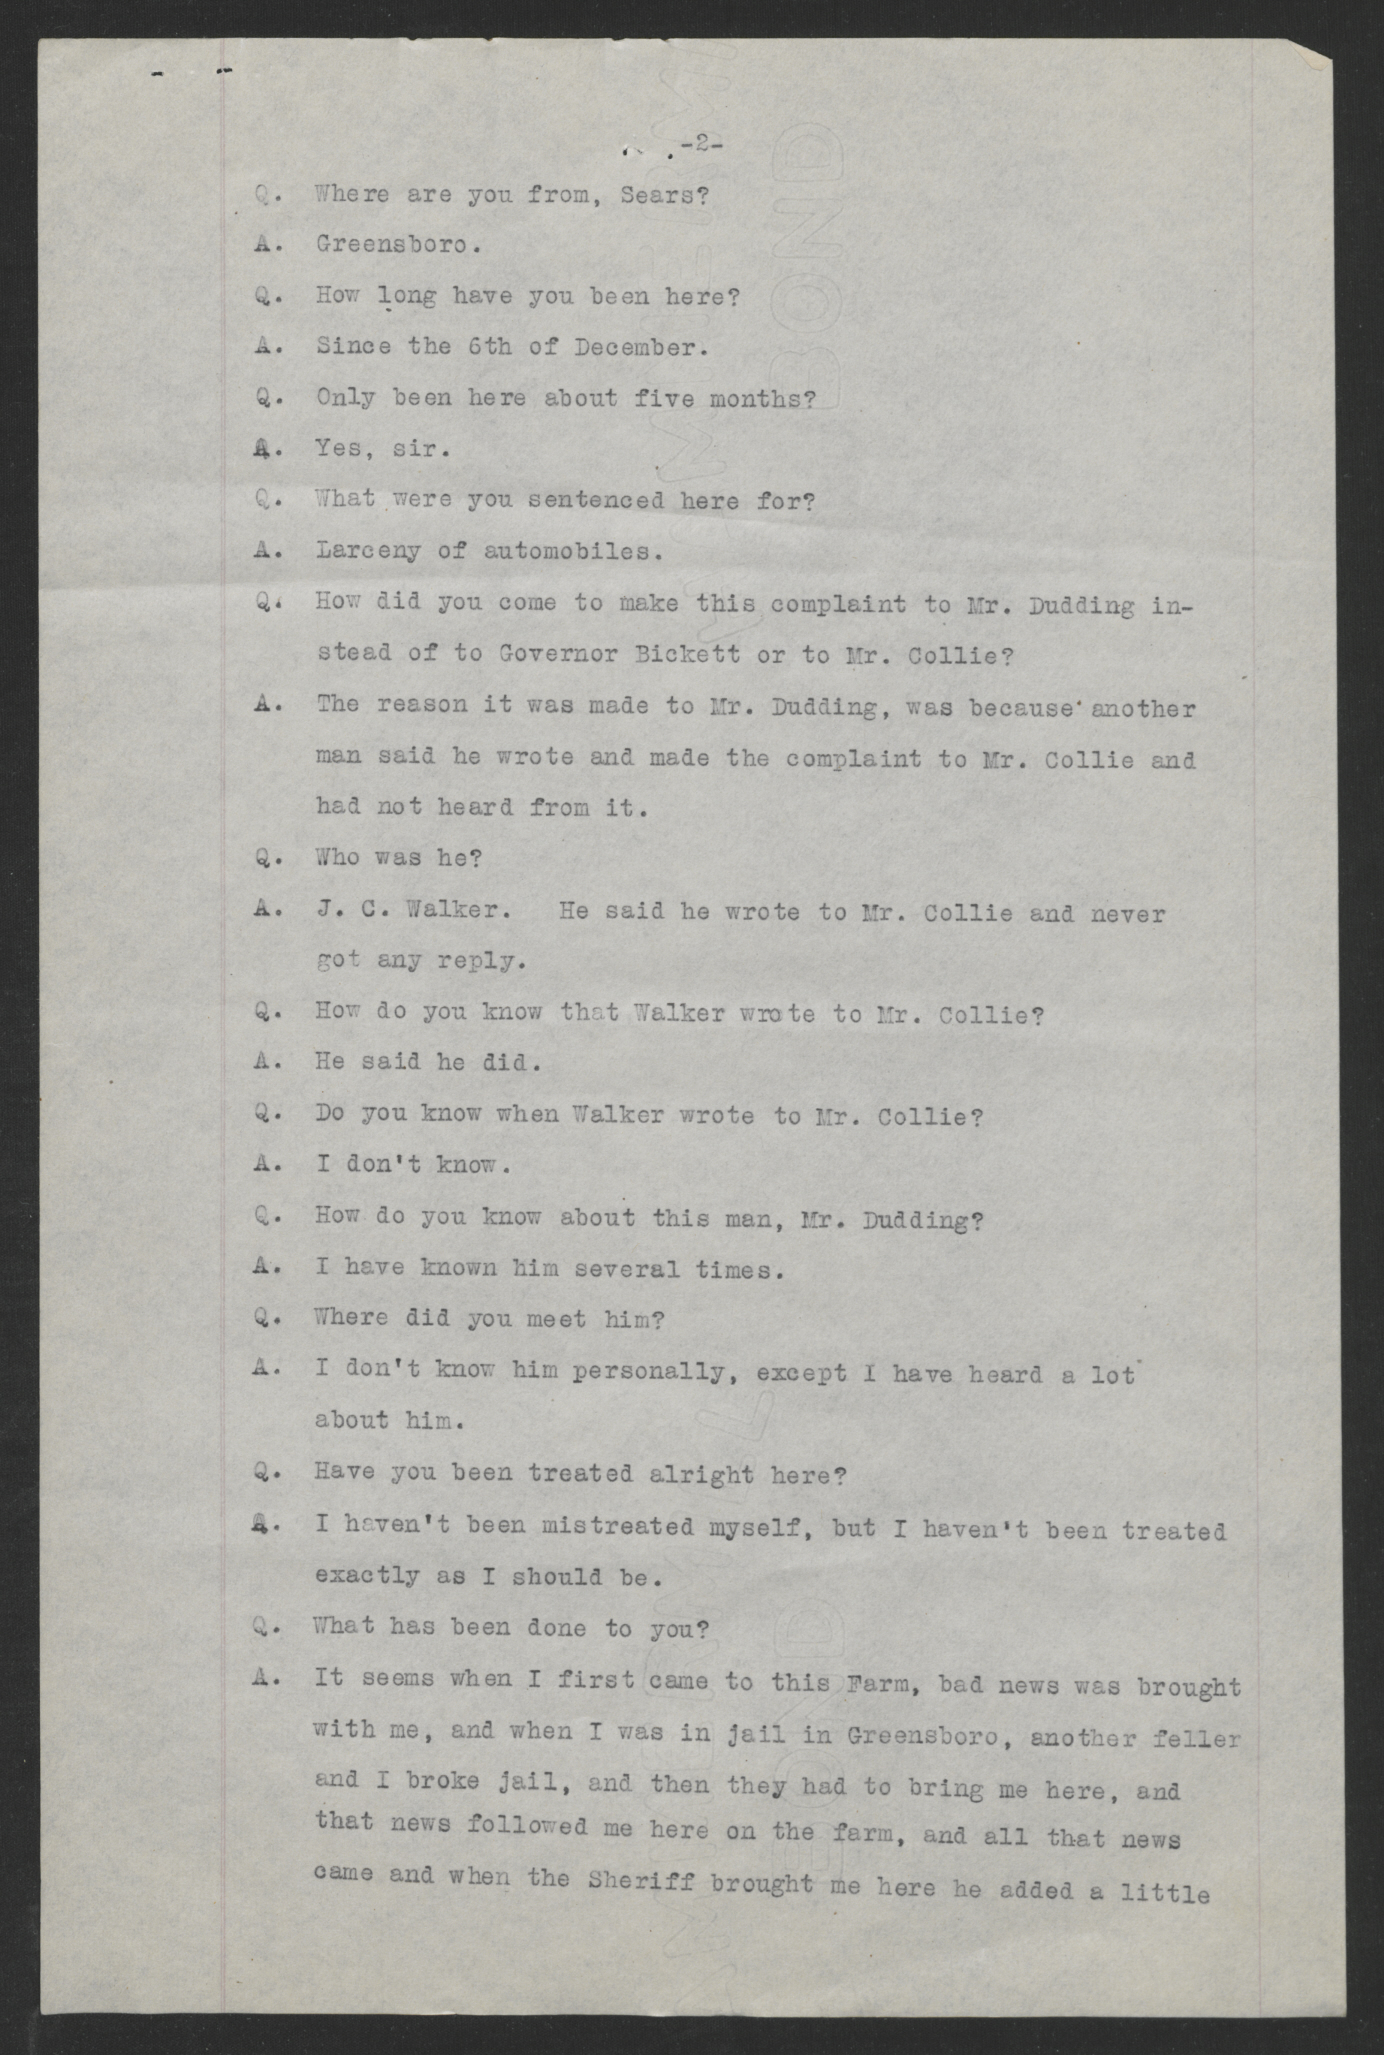 Investigation of the Charges Made by Inmates of the State Prison Farm to Earl E. Dudding, 12 May 1919, page 2